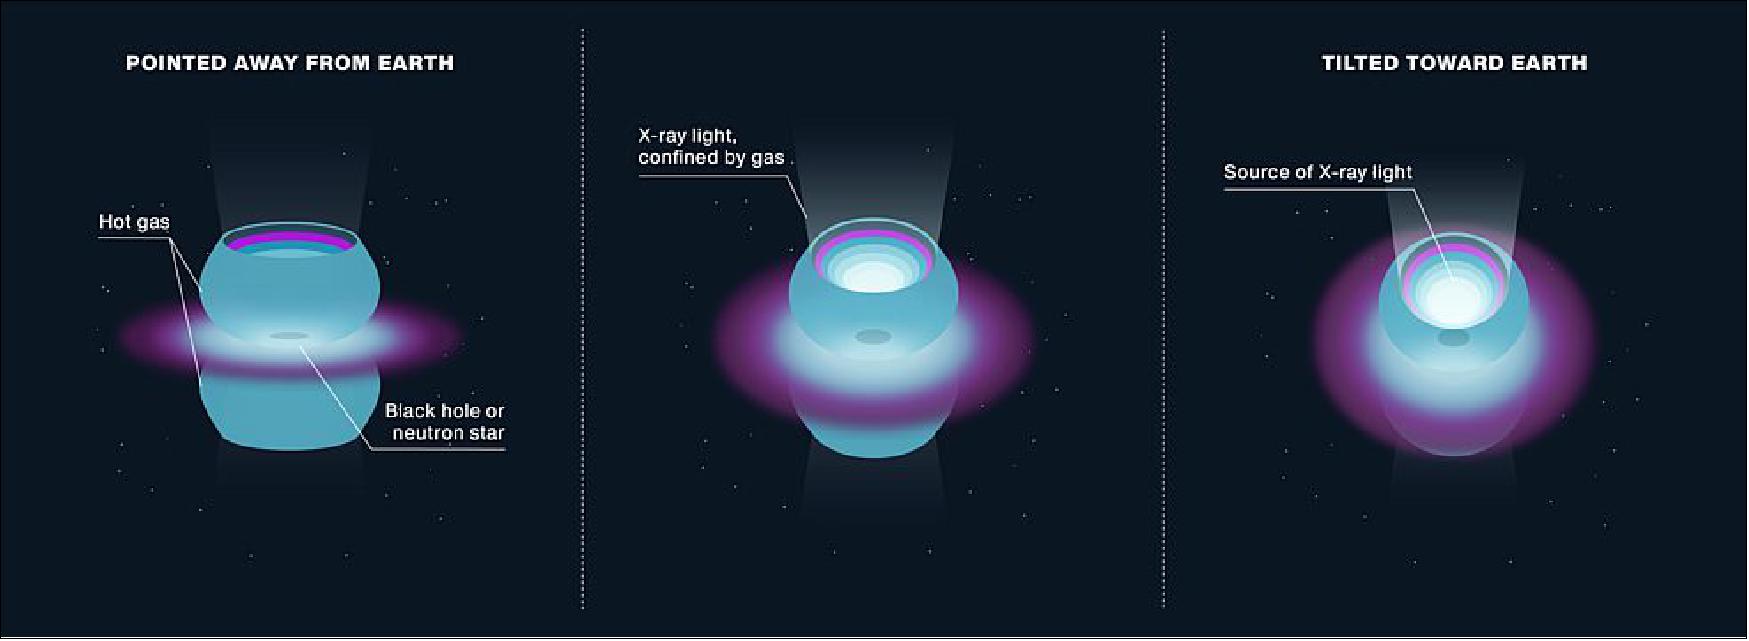 Figure 19: The cosmic object SS 433 contains a bright source of X-ray light surrounded by two hemispheres of hot gas. The gas corrals the light into beams pointing in opposite directions away from the source. SS 433 tilts periodically, causing one X-ray beam to point toward Earth (image credit: NASA/JPL-Caltech)